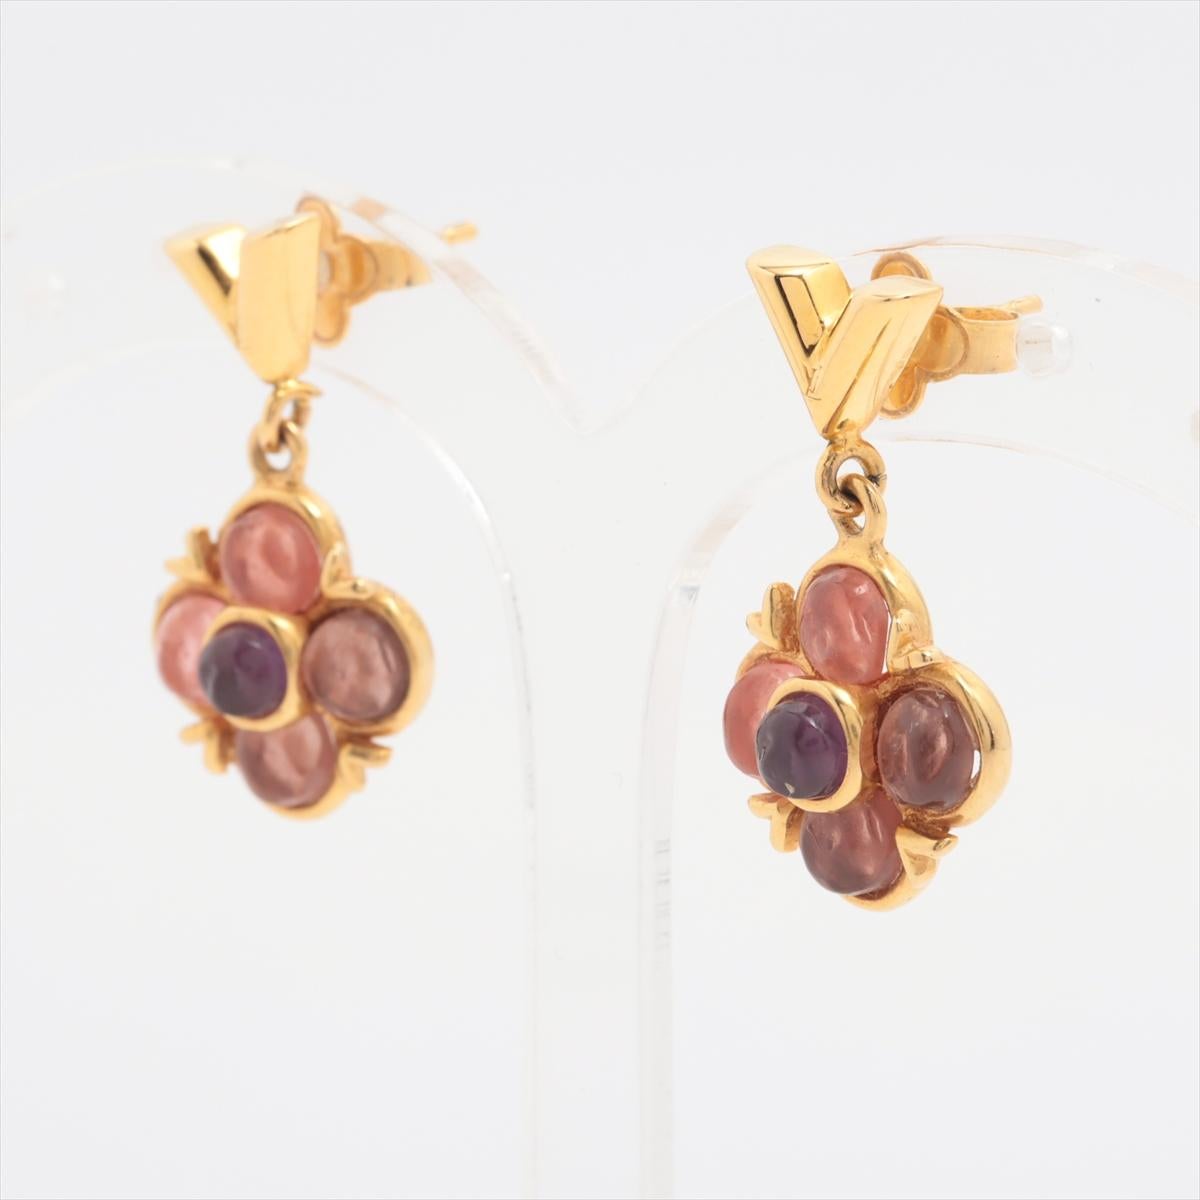 The Louis Vuitton Very Flower Earrings in Pink and Purple Gold beautifully combine luxury and sophistication. The earrings feature an iconic V-shaped design, adorned with delicate flowers, showcasing Louis Vuitton's signature aesthetic. The